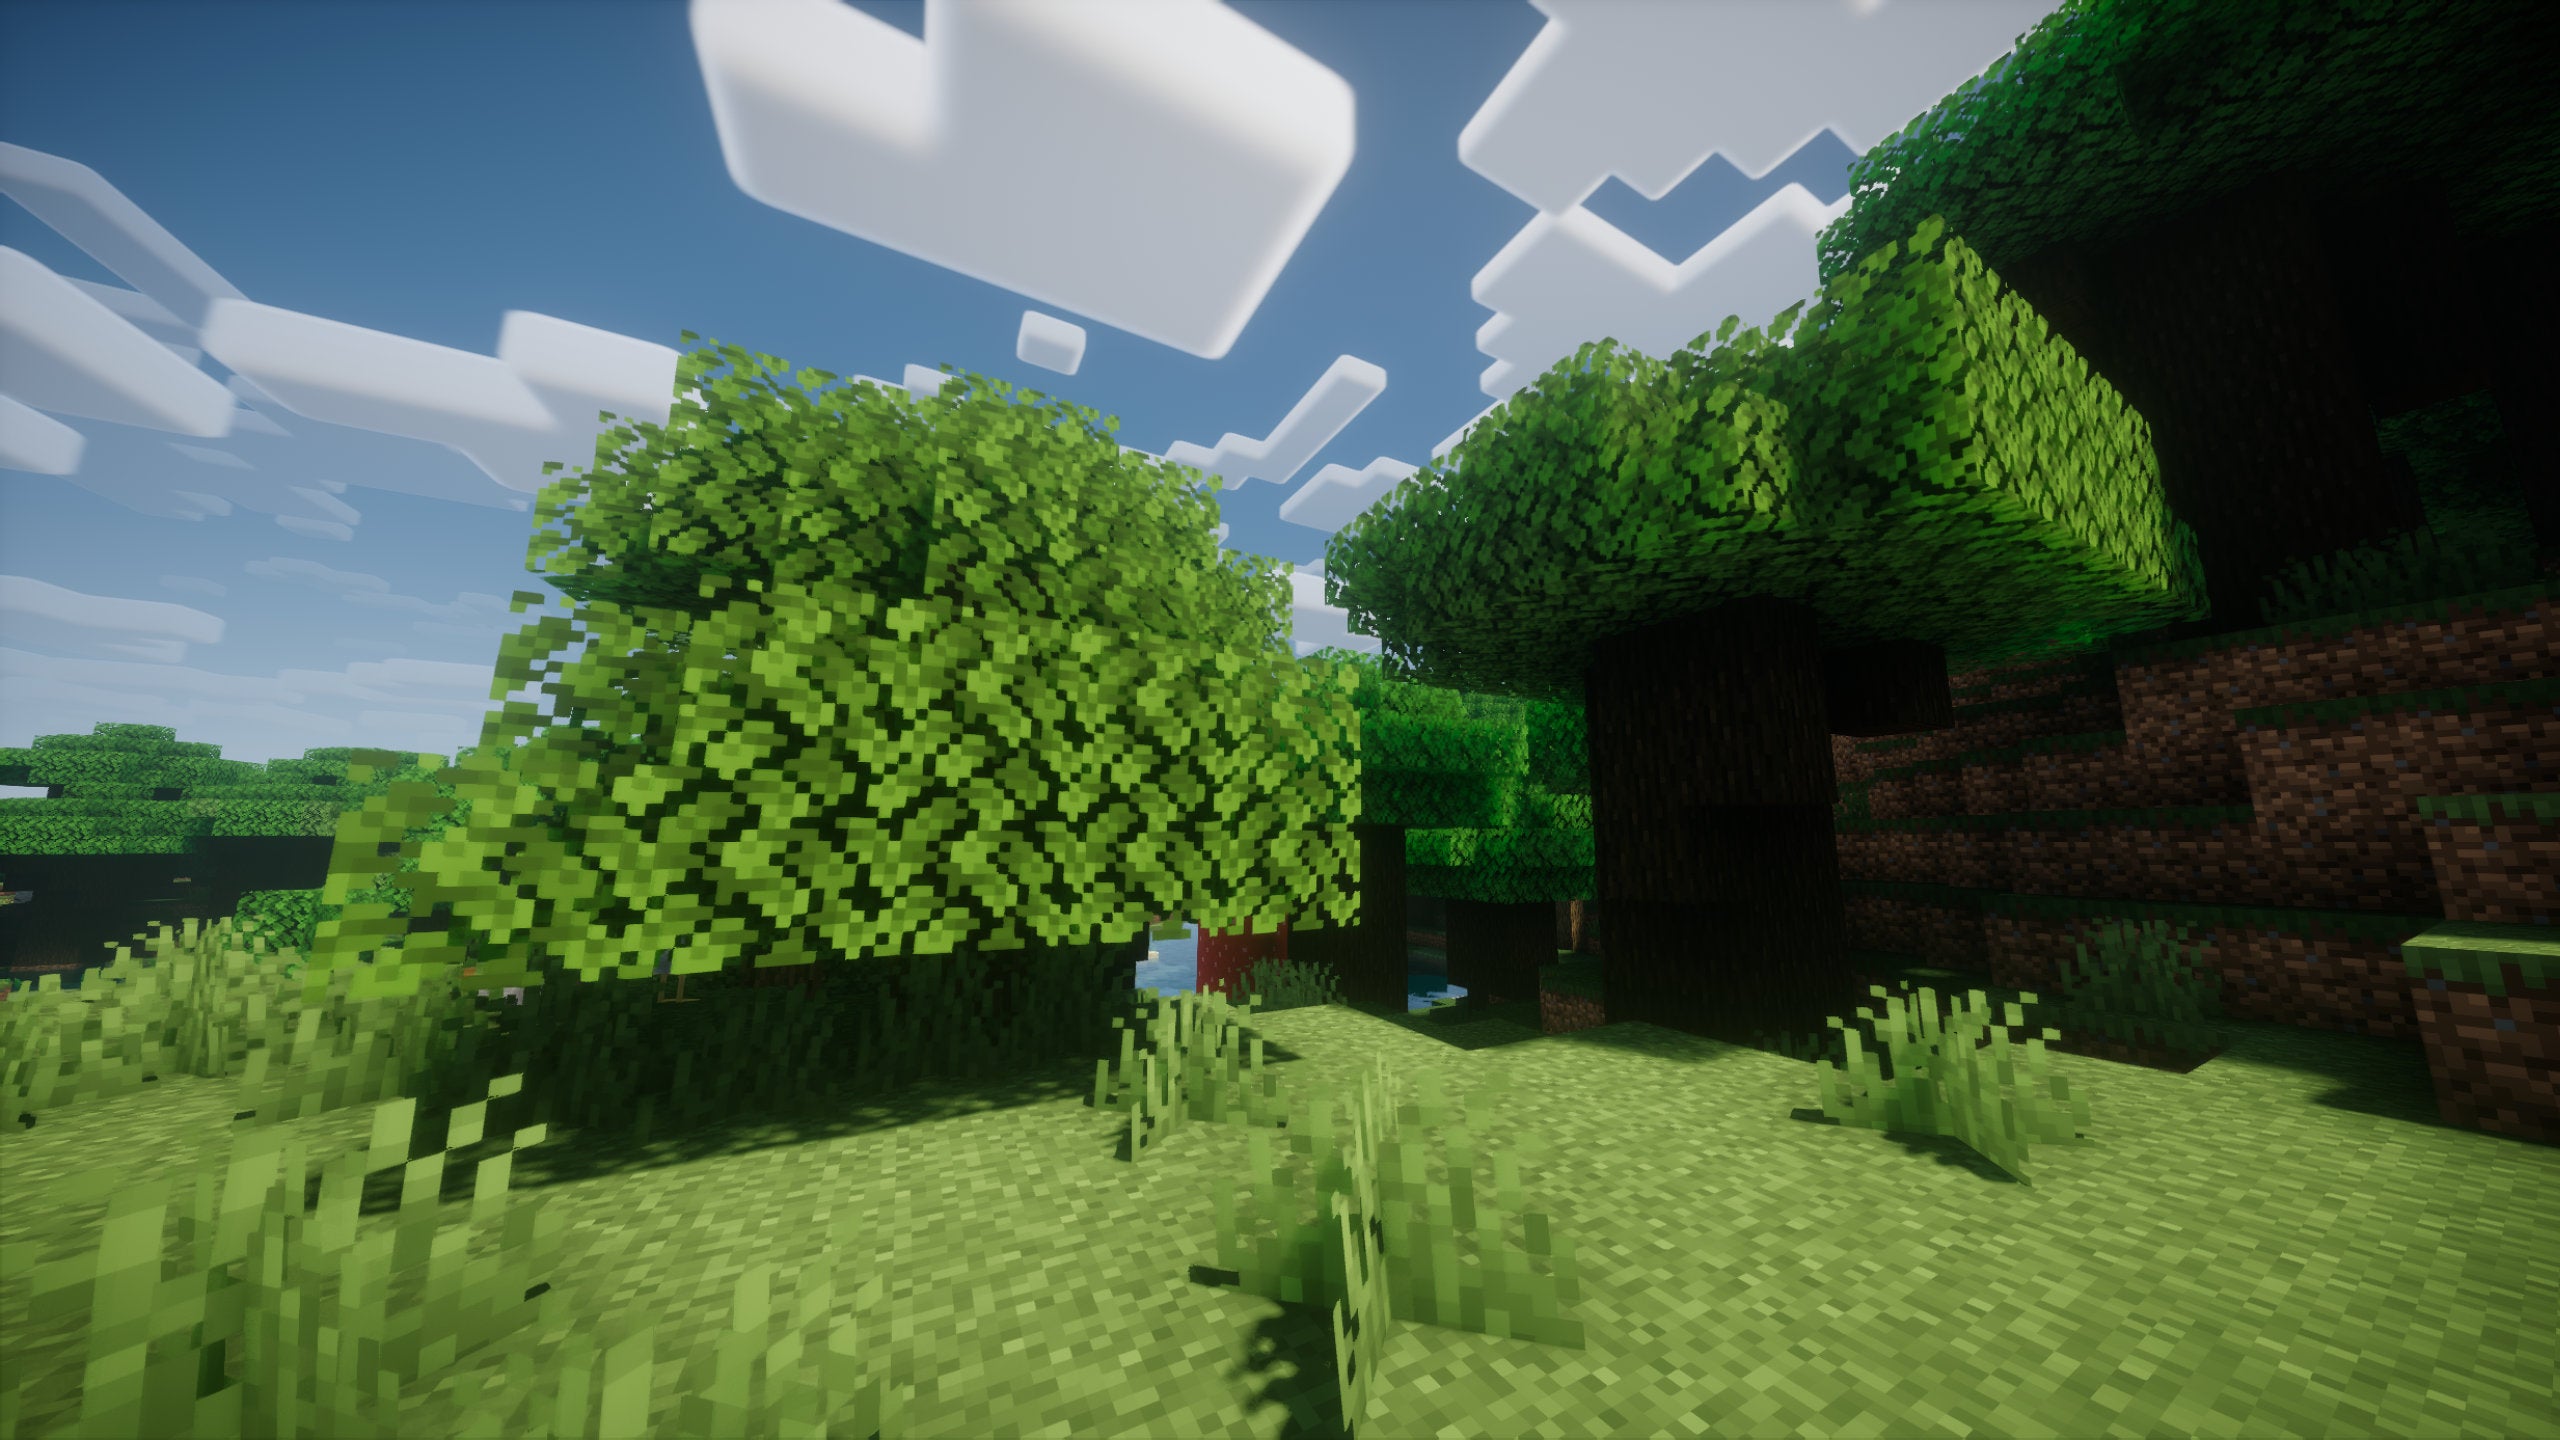 Two Minecraft trees side-by-side in a plains biome.